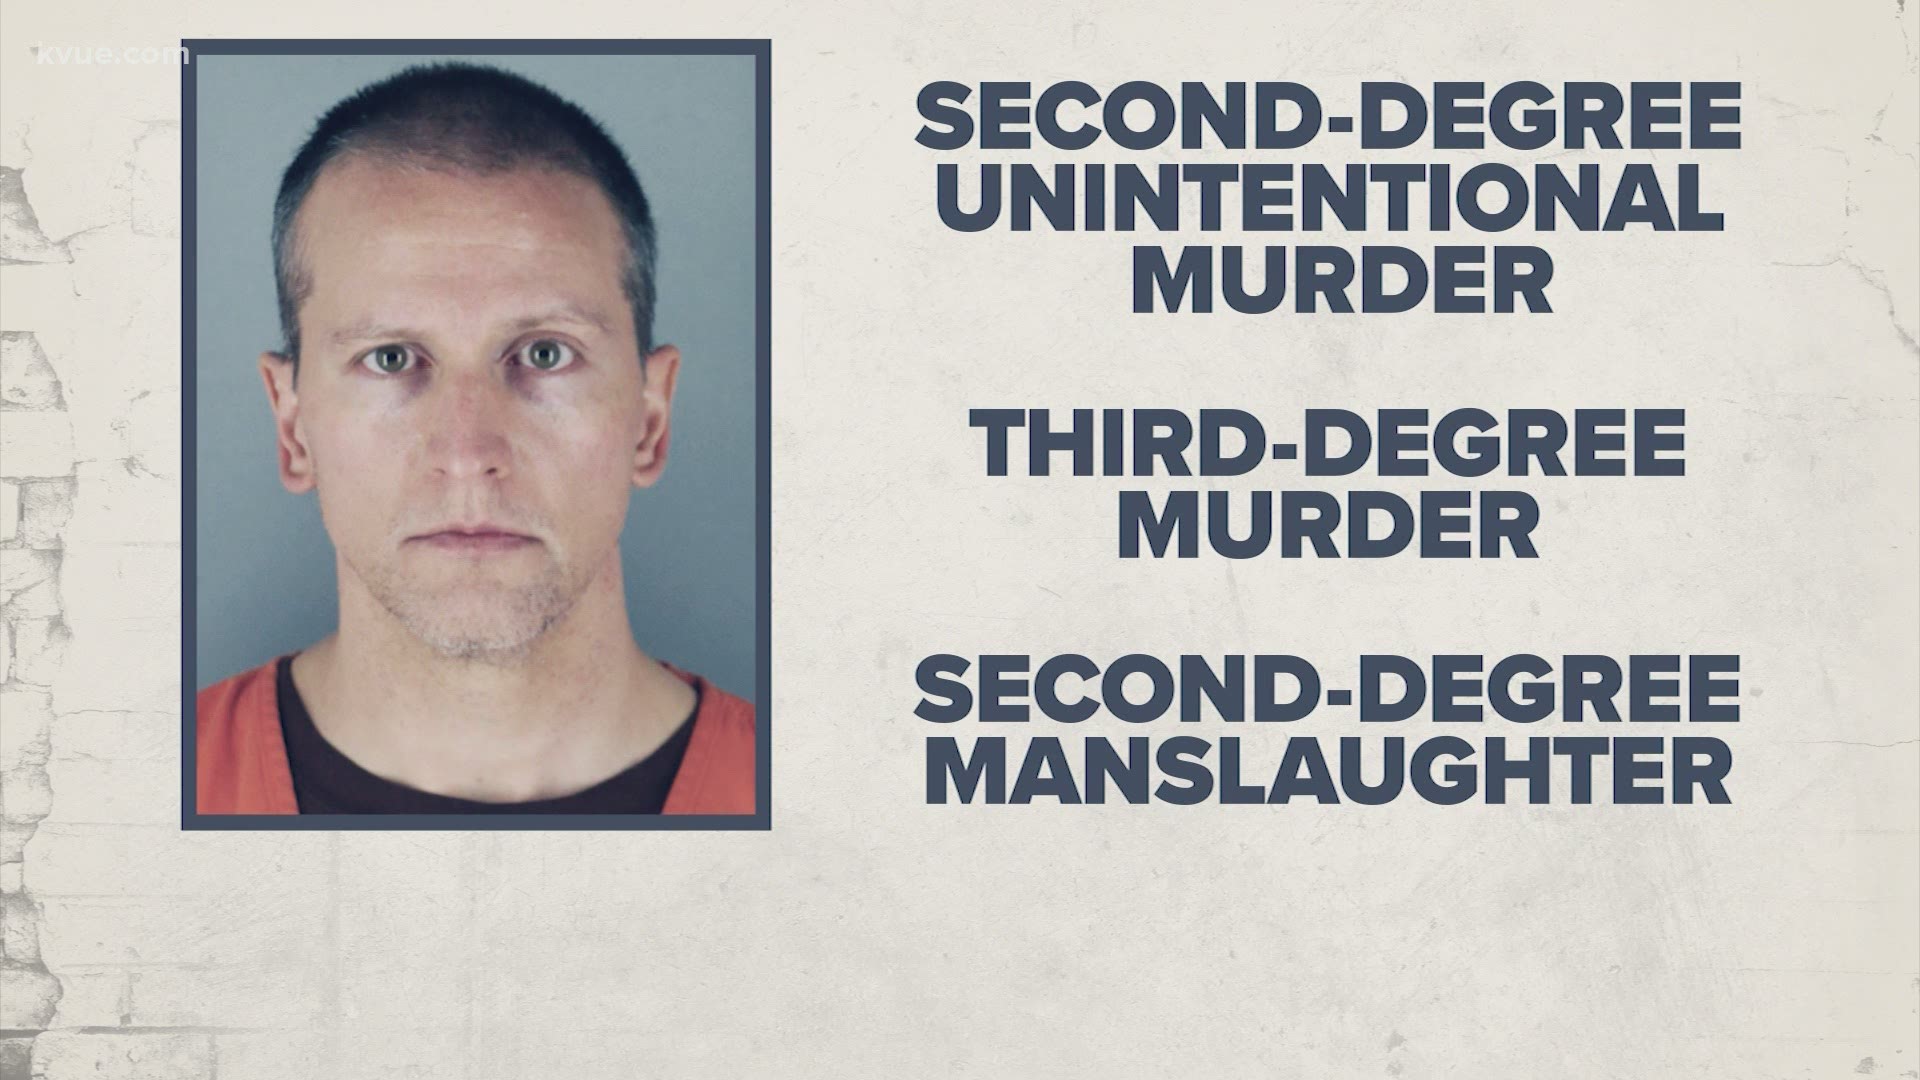 Former Minneapolis police officer Derek Chauvin was found guilty on all three counts in George Floyd's May 2020 death.